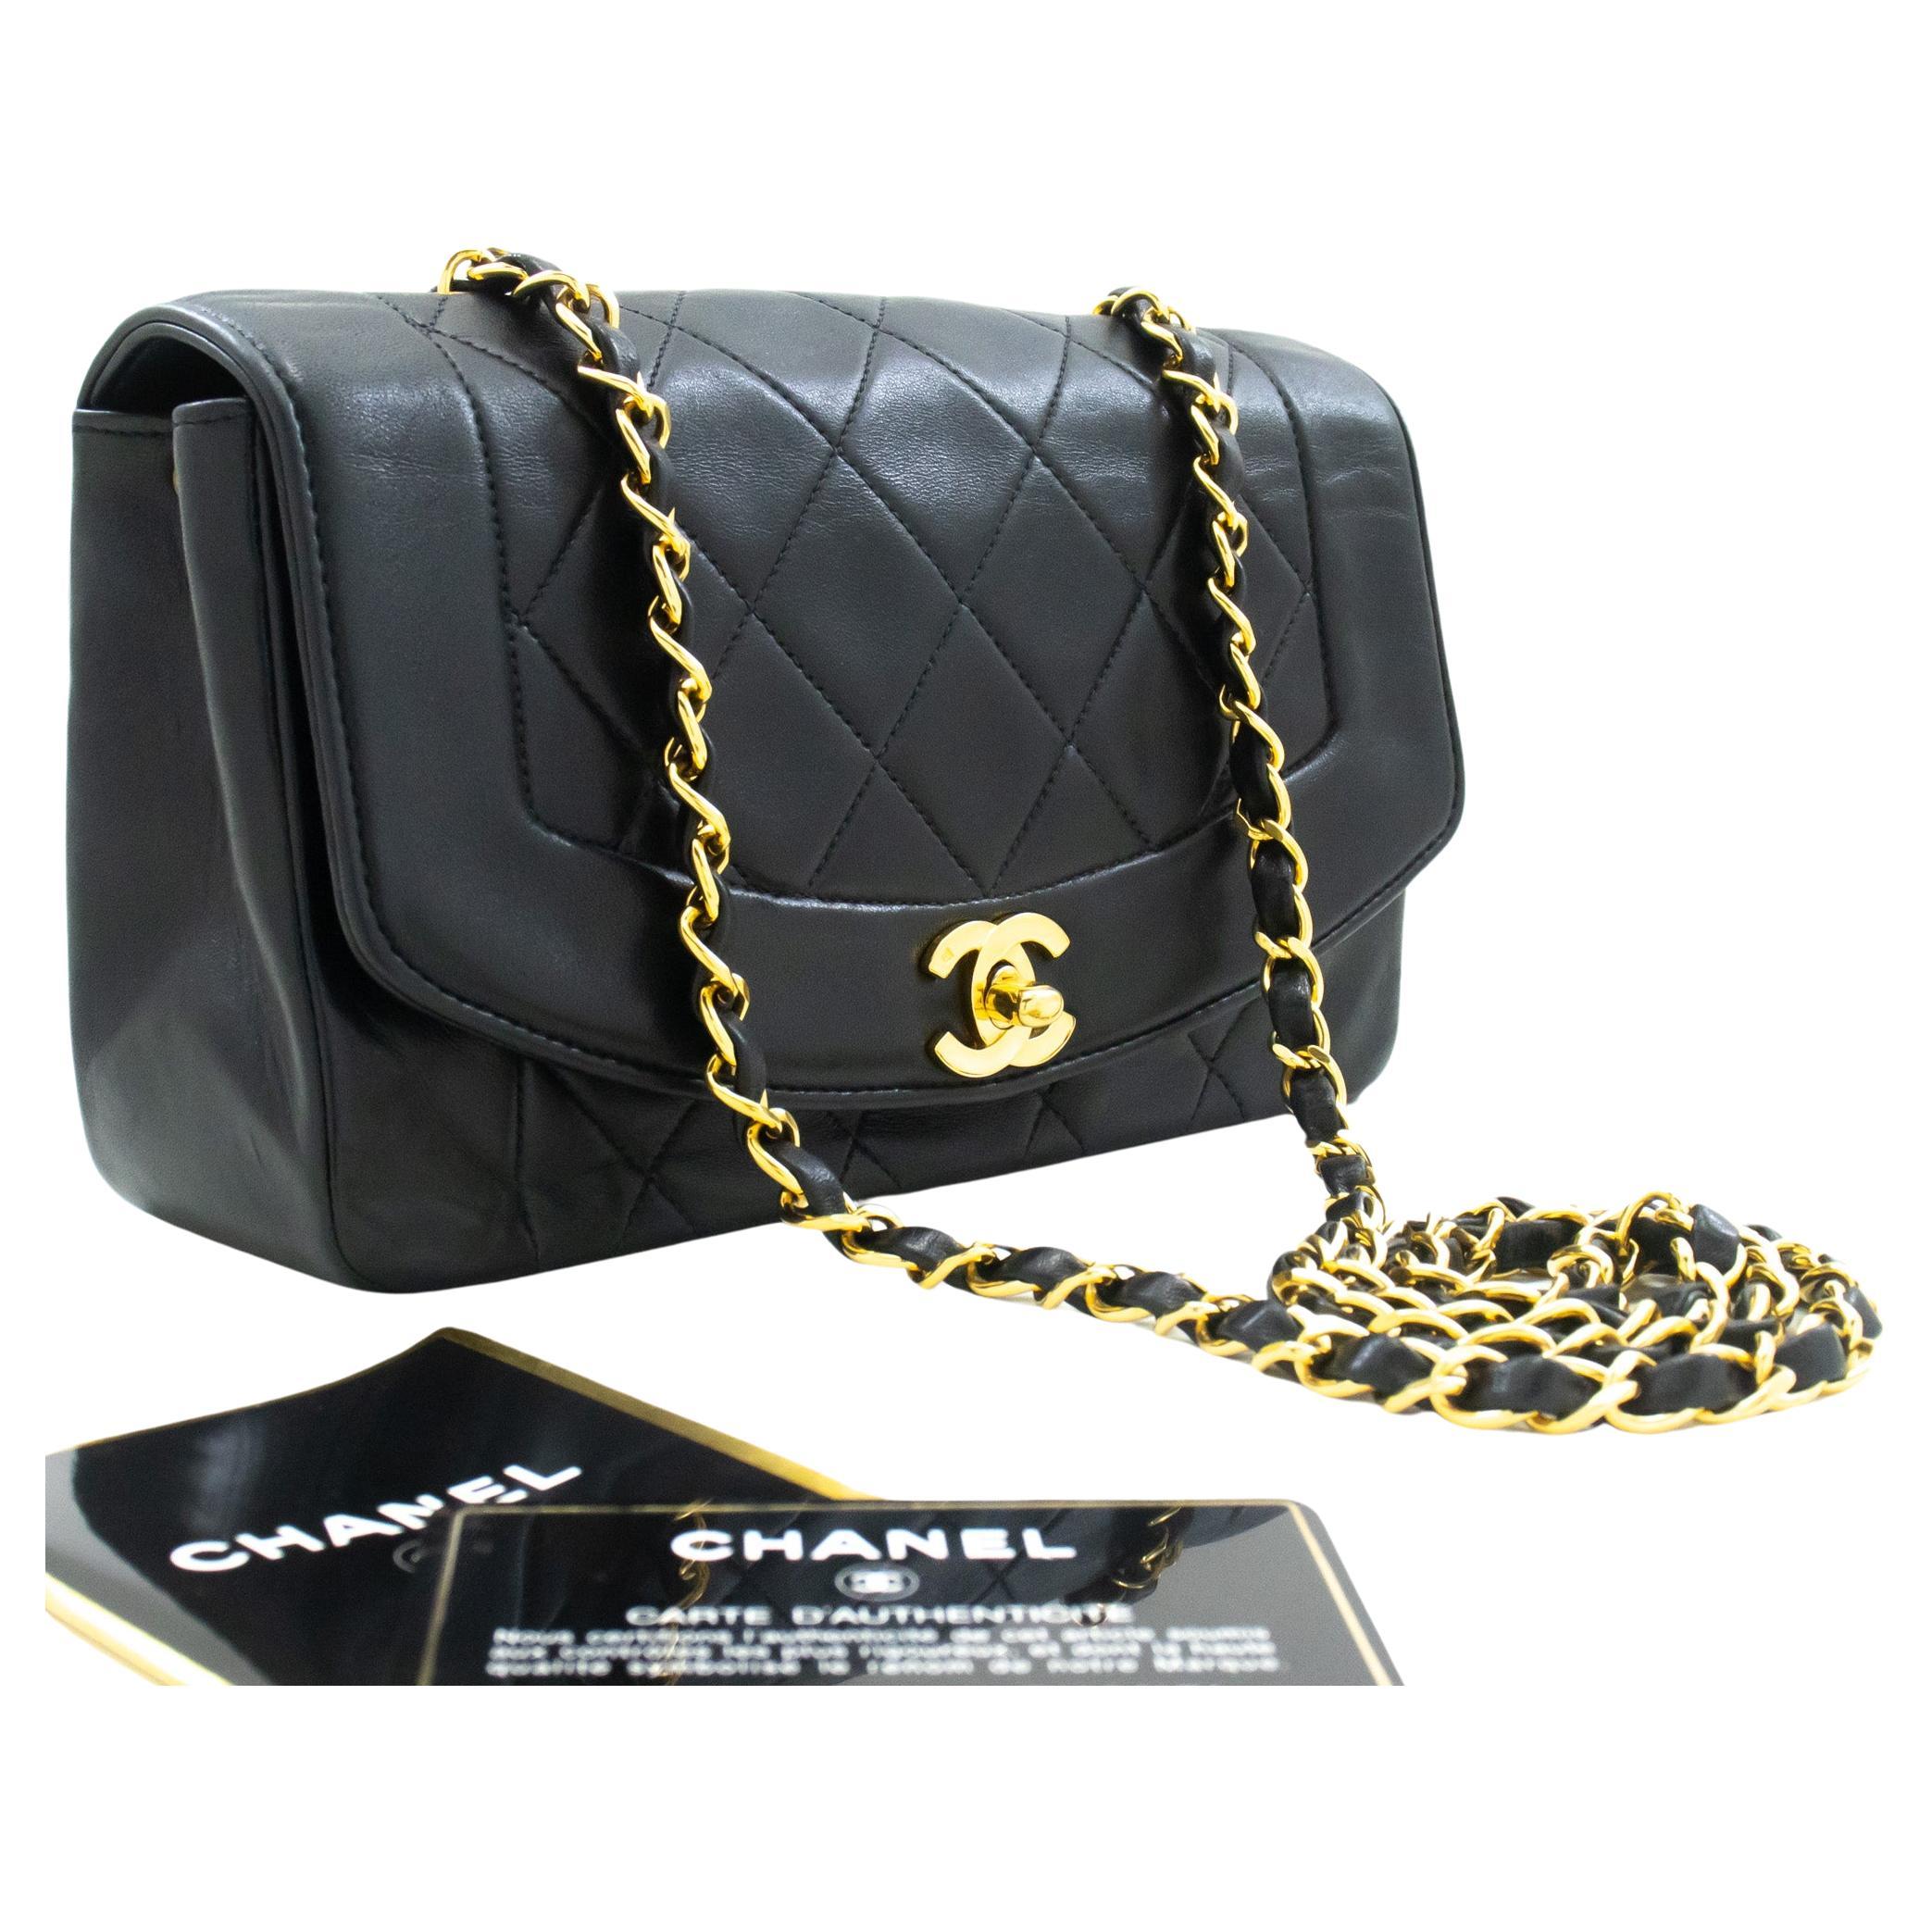 Do vintage Chanel bags have real gold?